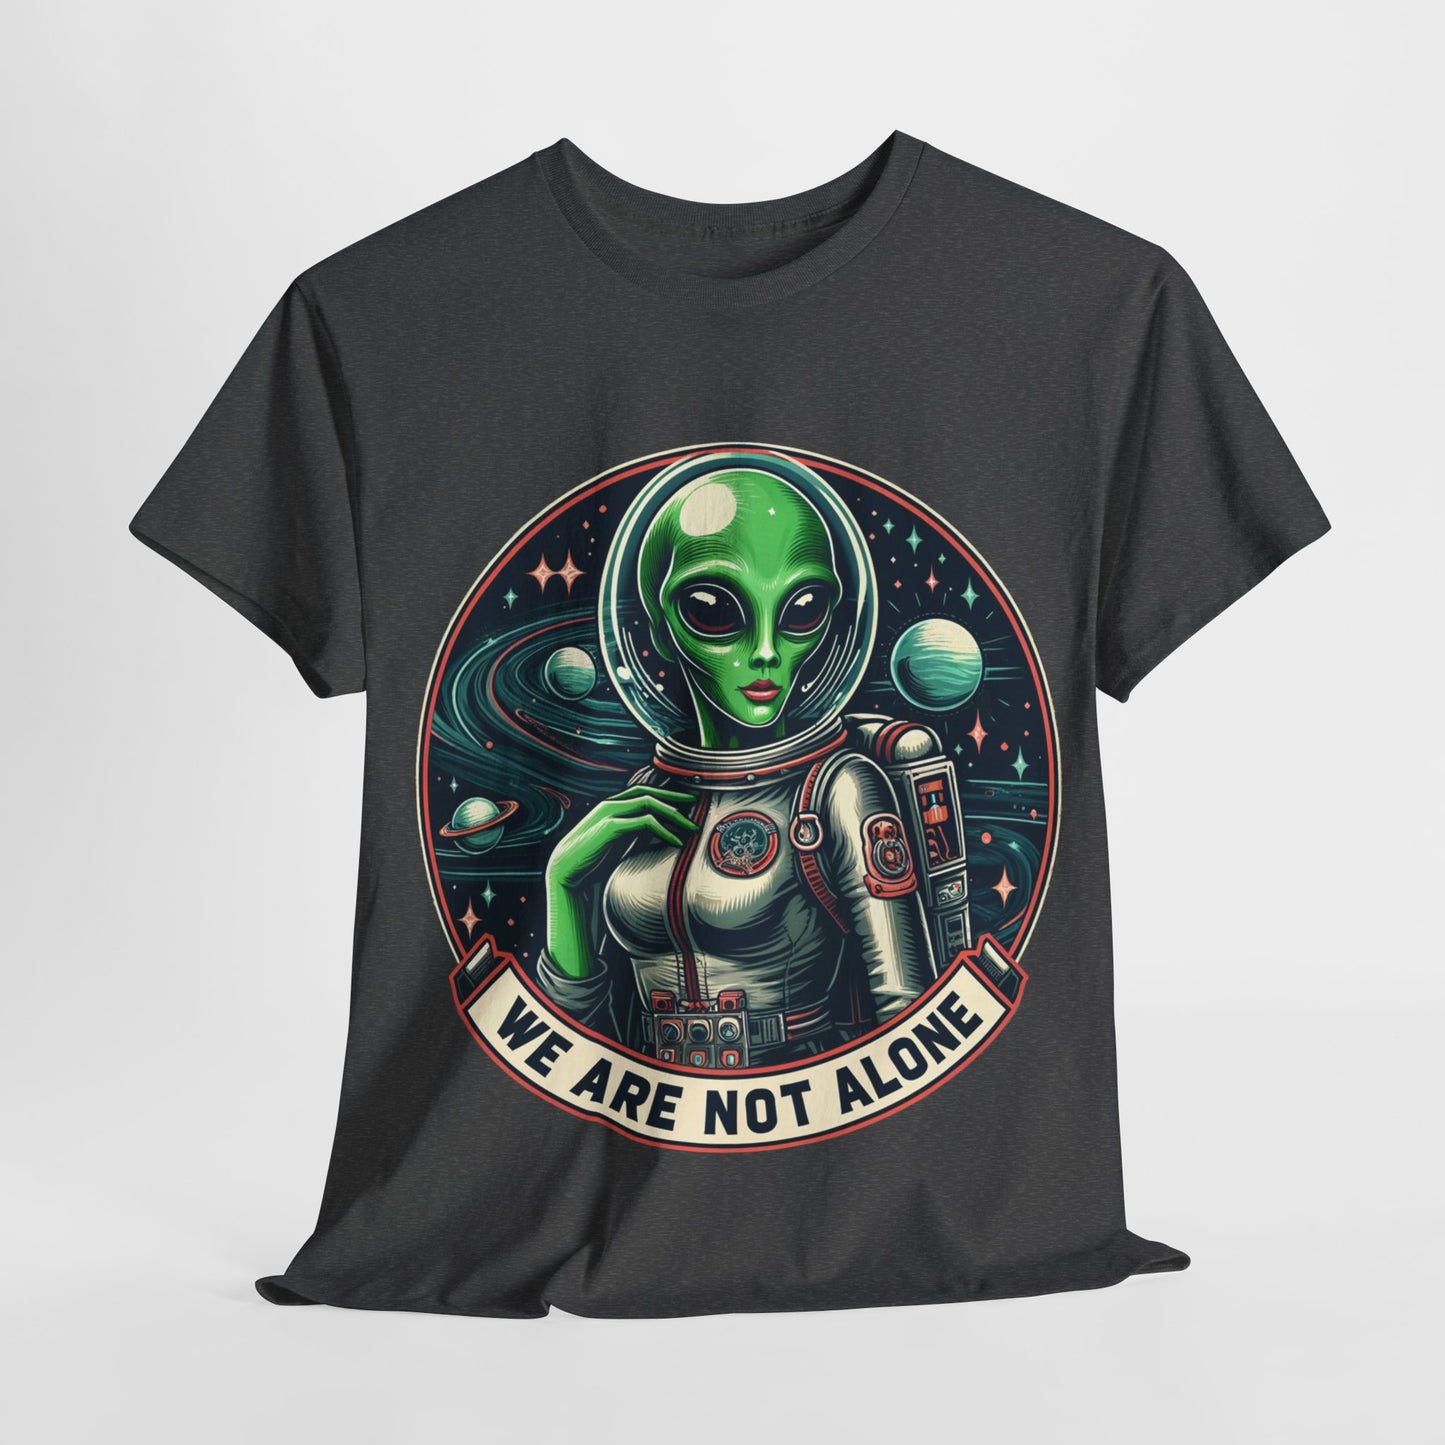 "Discover 'We Are Not Alone' Alien Tee: Embrace Cosmic Mysteries in Vintage Sci-Fi Style" 🌌✨